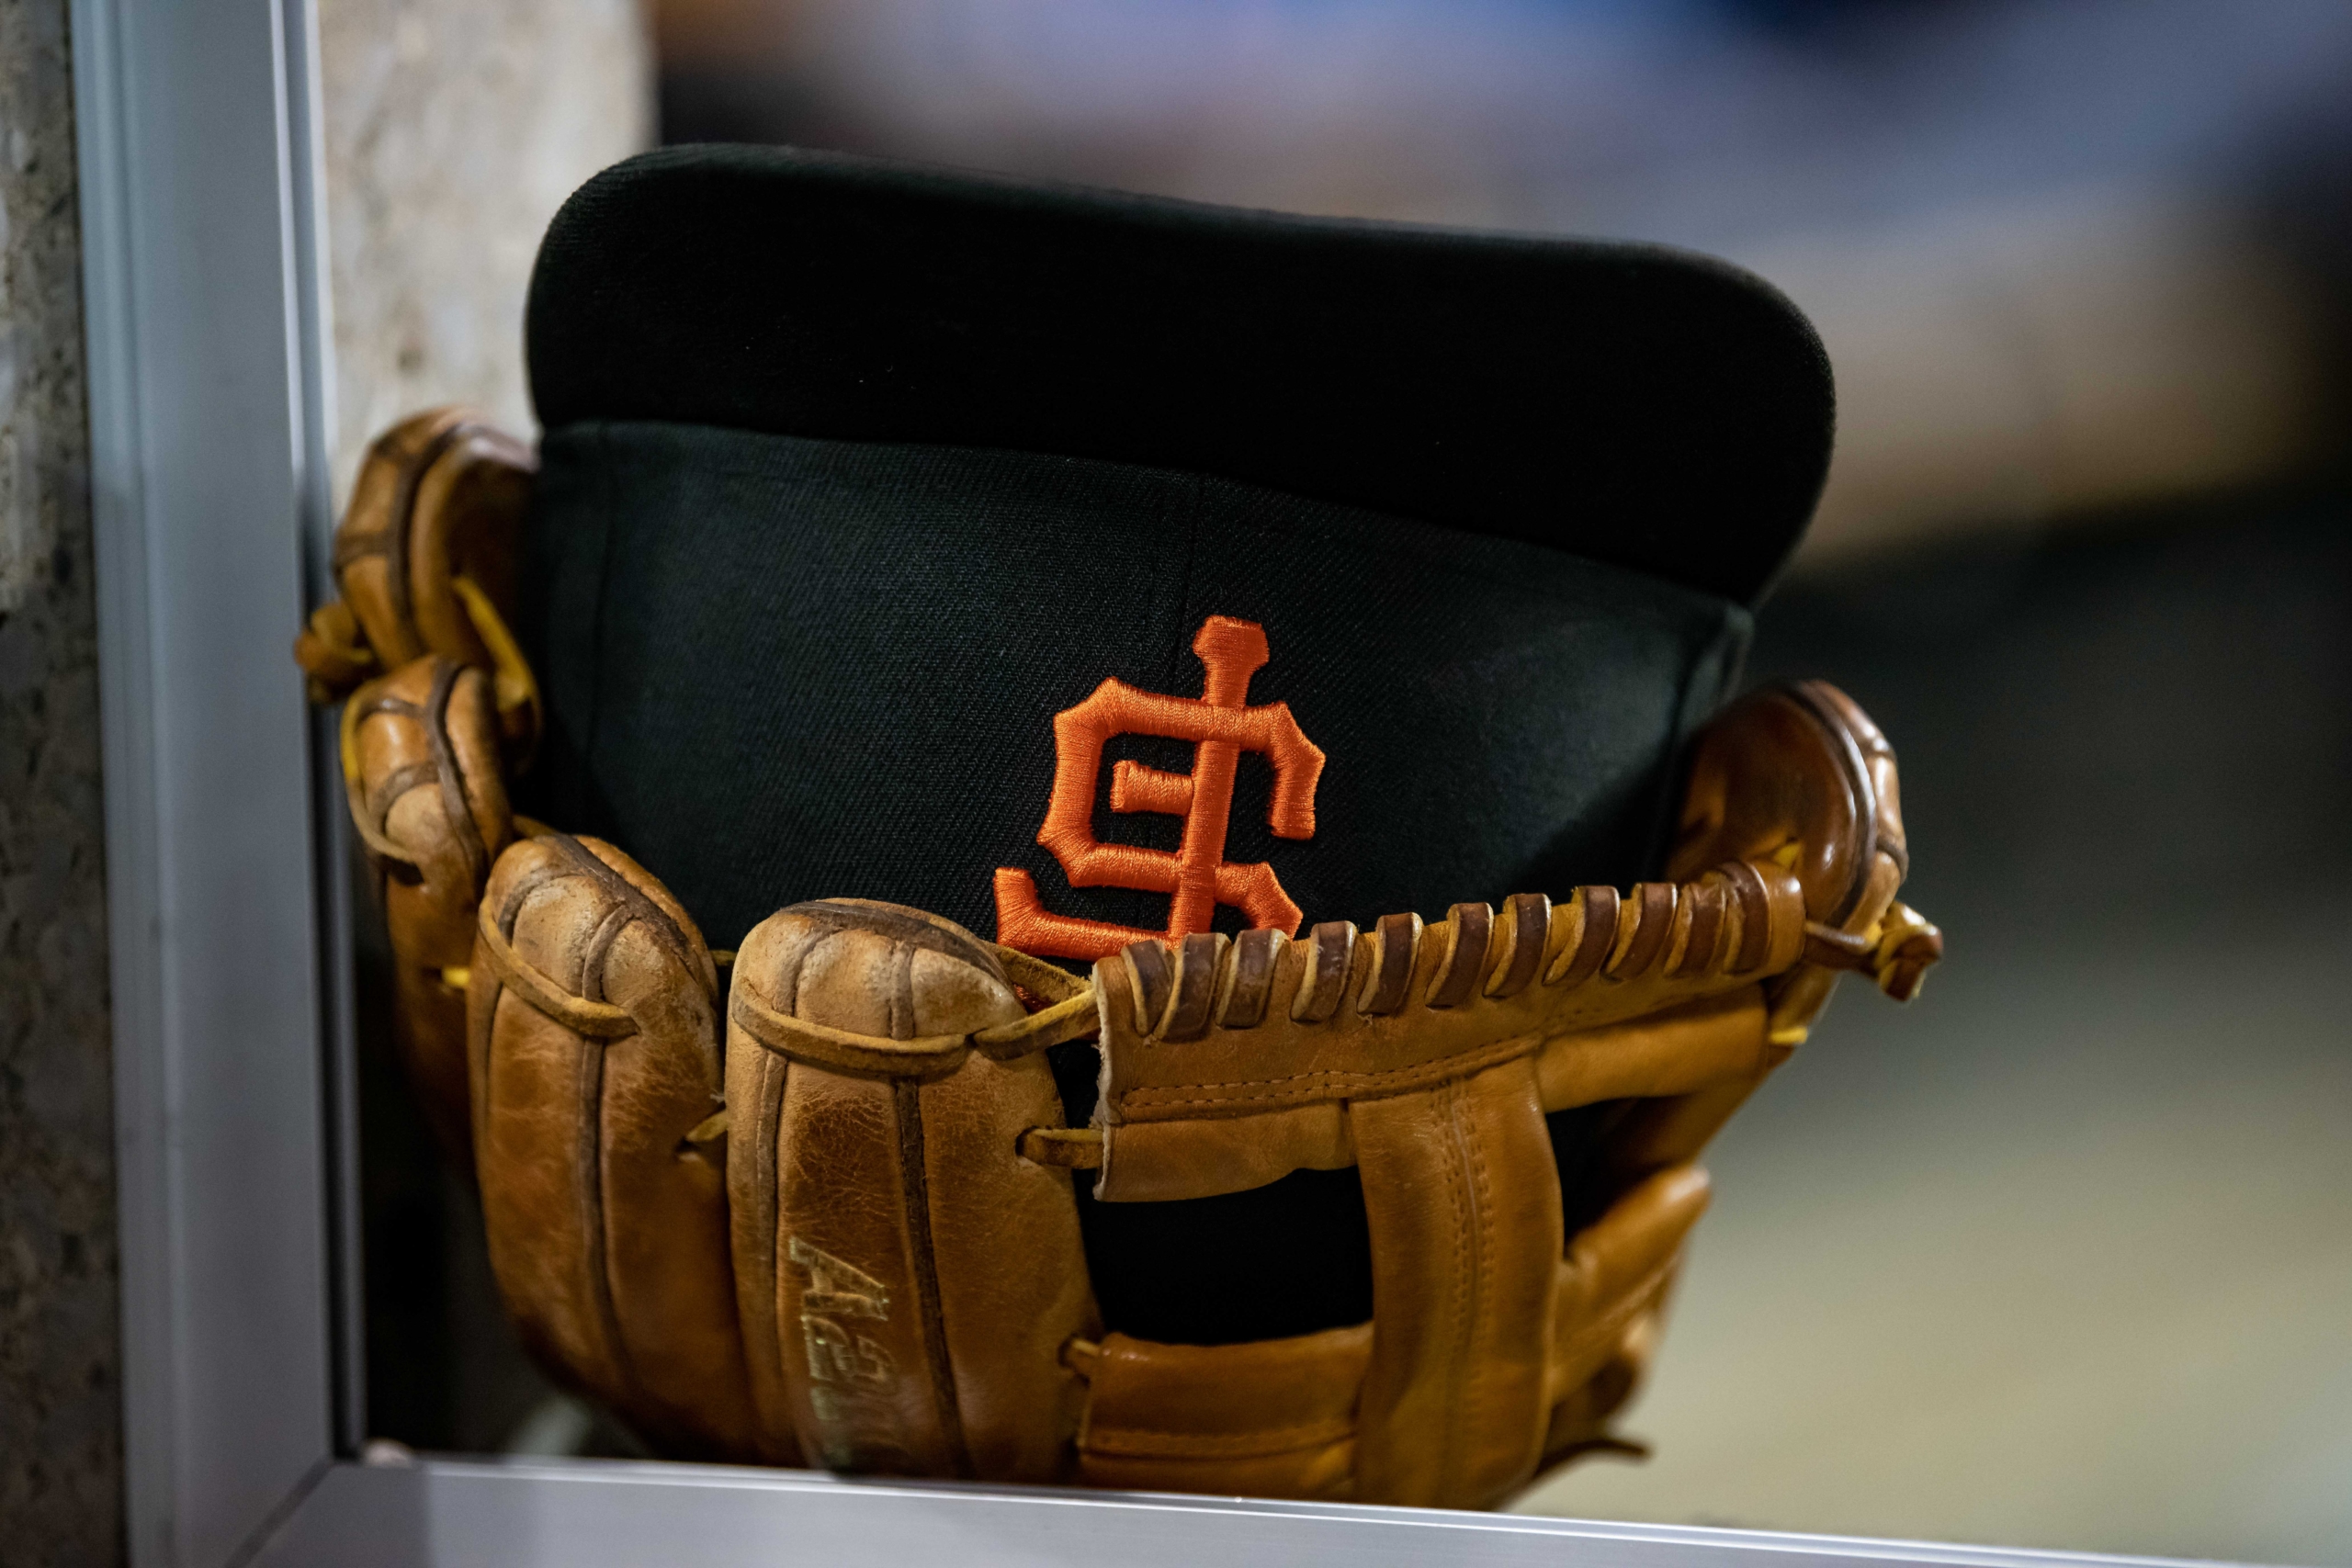 San Francisco Giants expect to be big-time spenders in MLB free agency